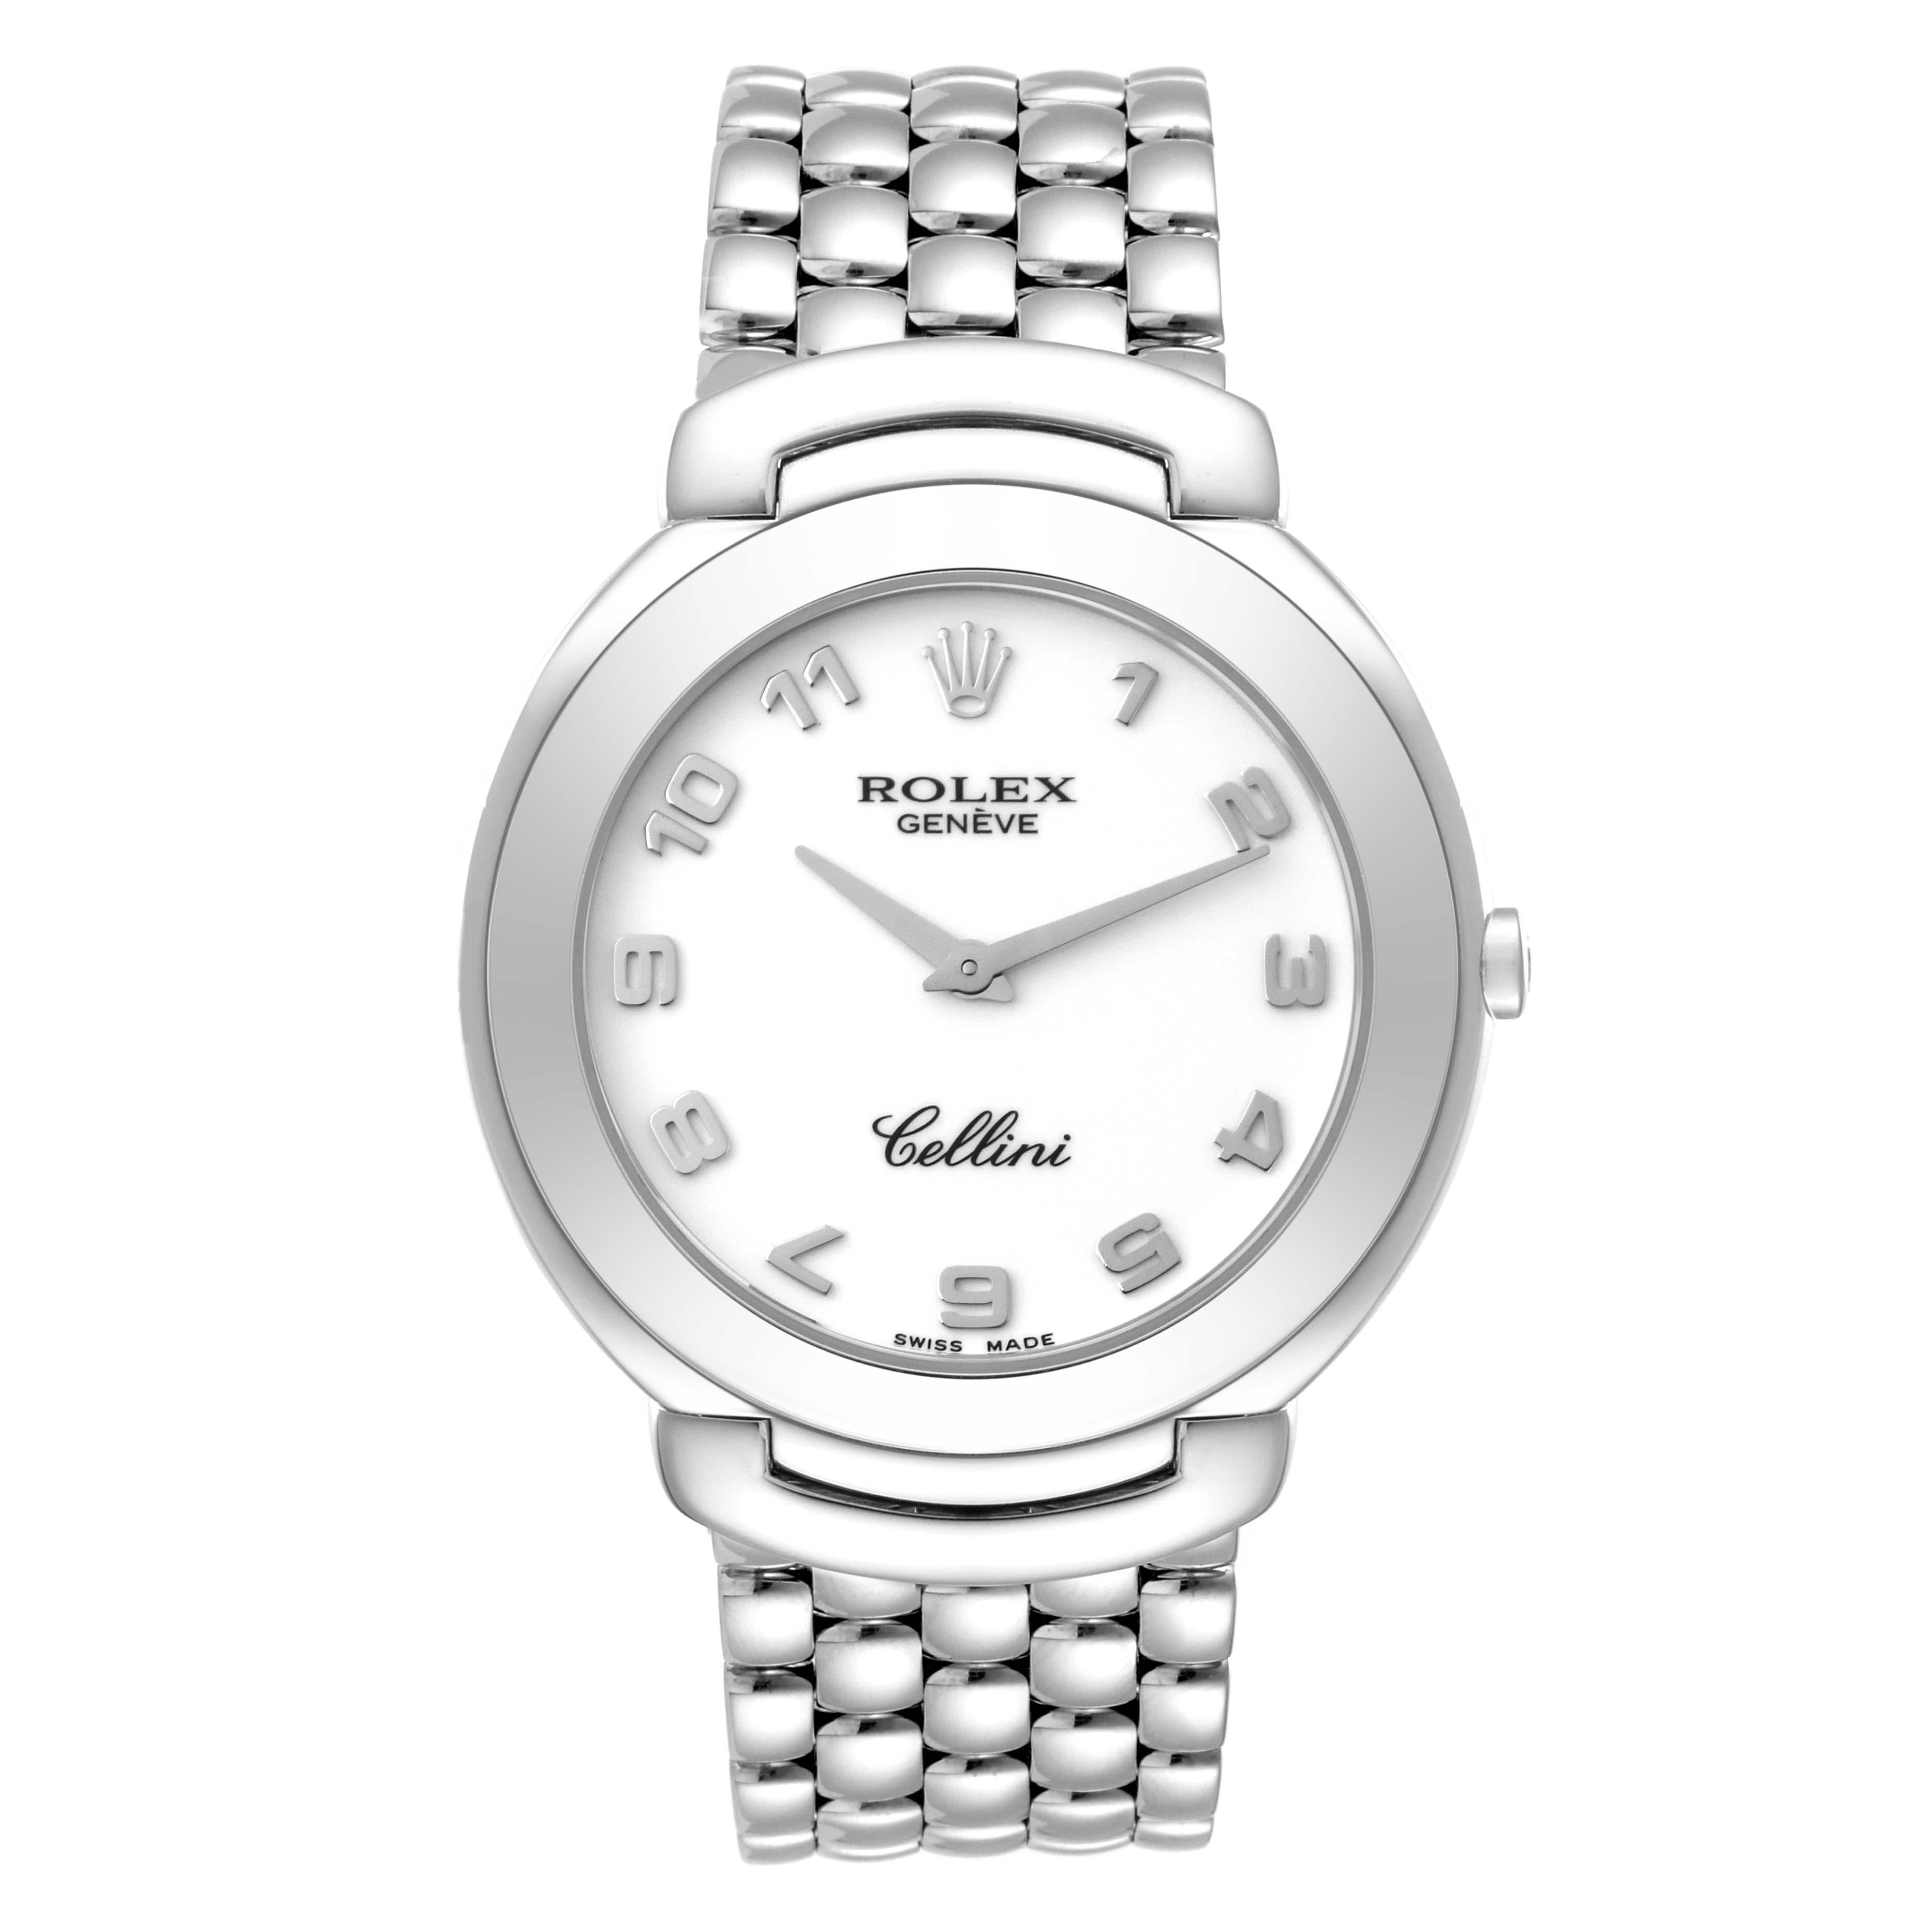 Rolex Cellini 18K White Gold Mens Watch 6623. Quartz movement. 18k white gold case 37.5mm. Rolex logo on a crown. Hooded lugs. . Scratch resistant sapphire crystal. White dial with raised white gold Arabic numerals. 18k white gold fitted polished